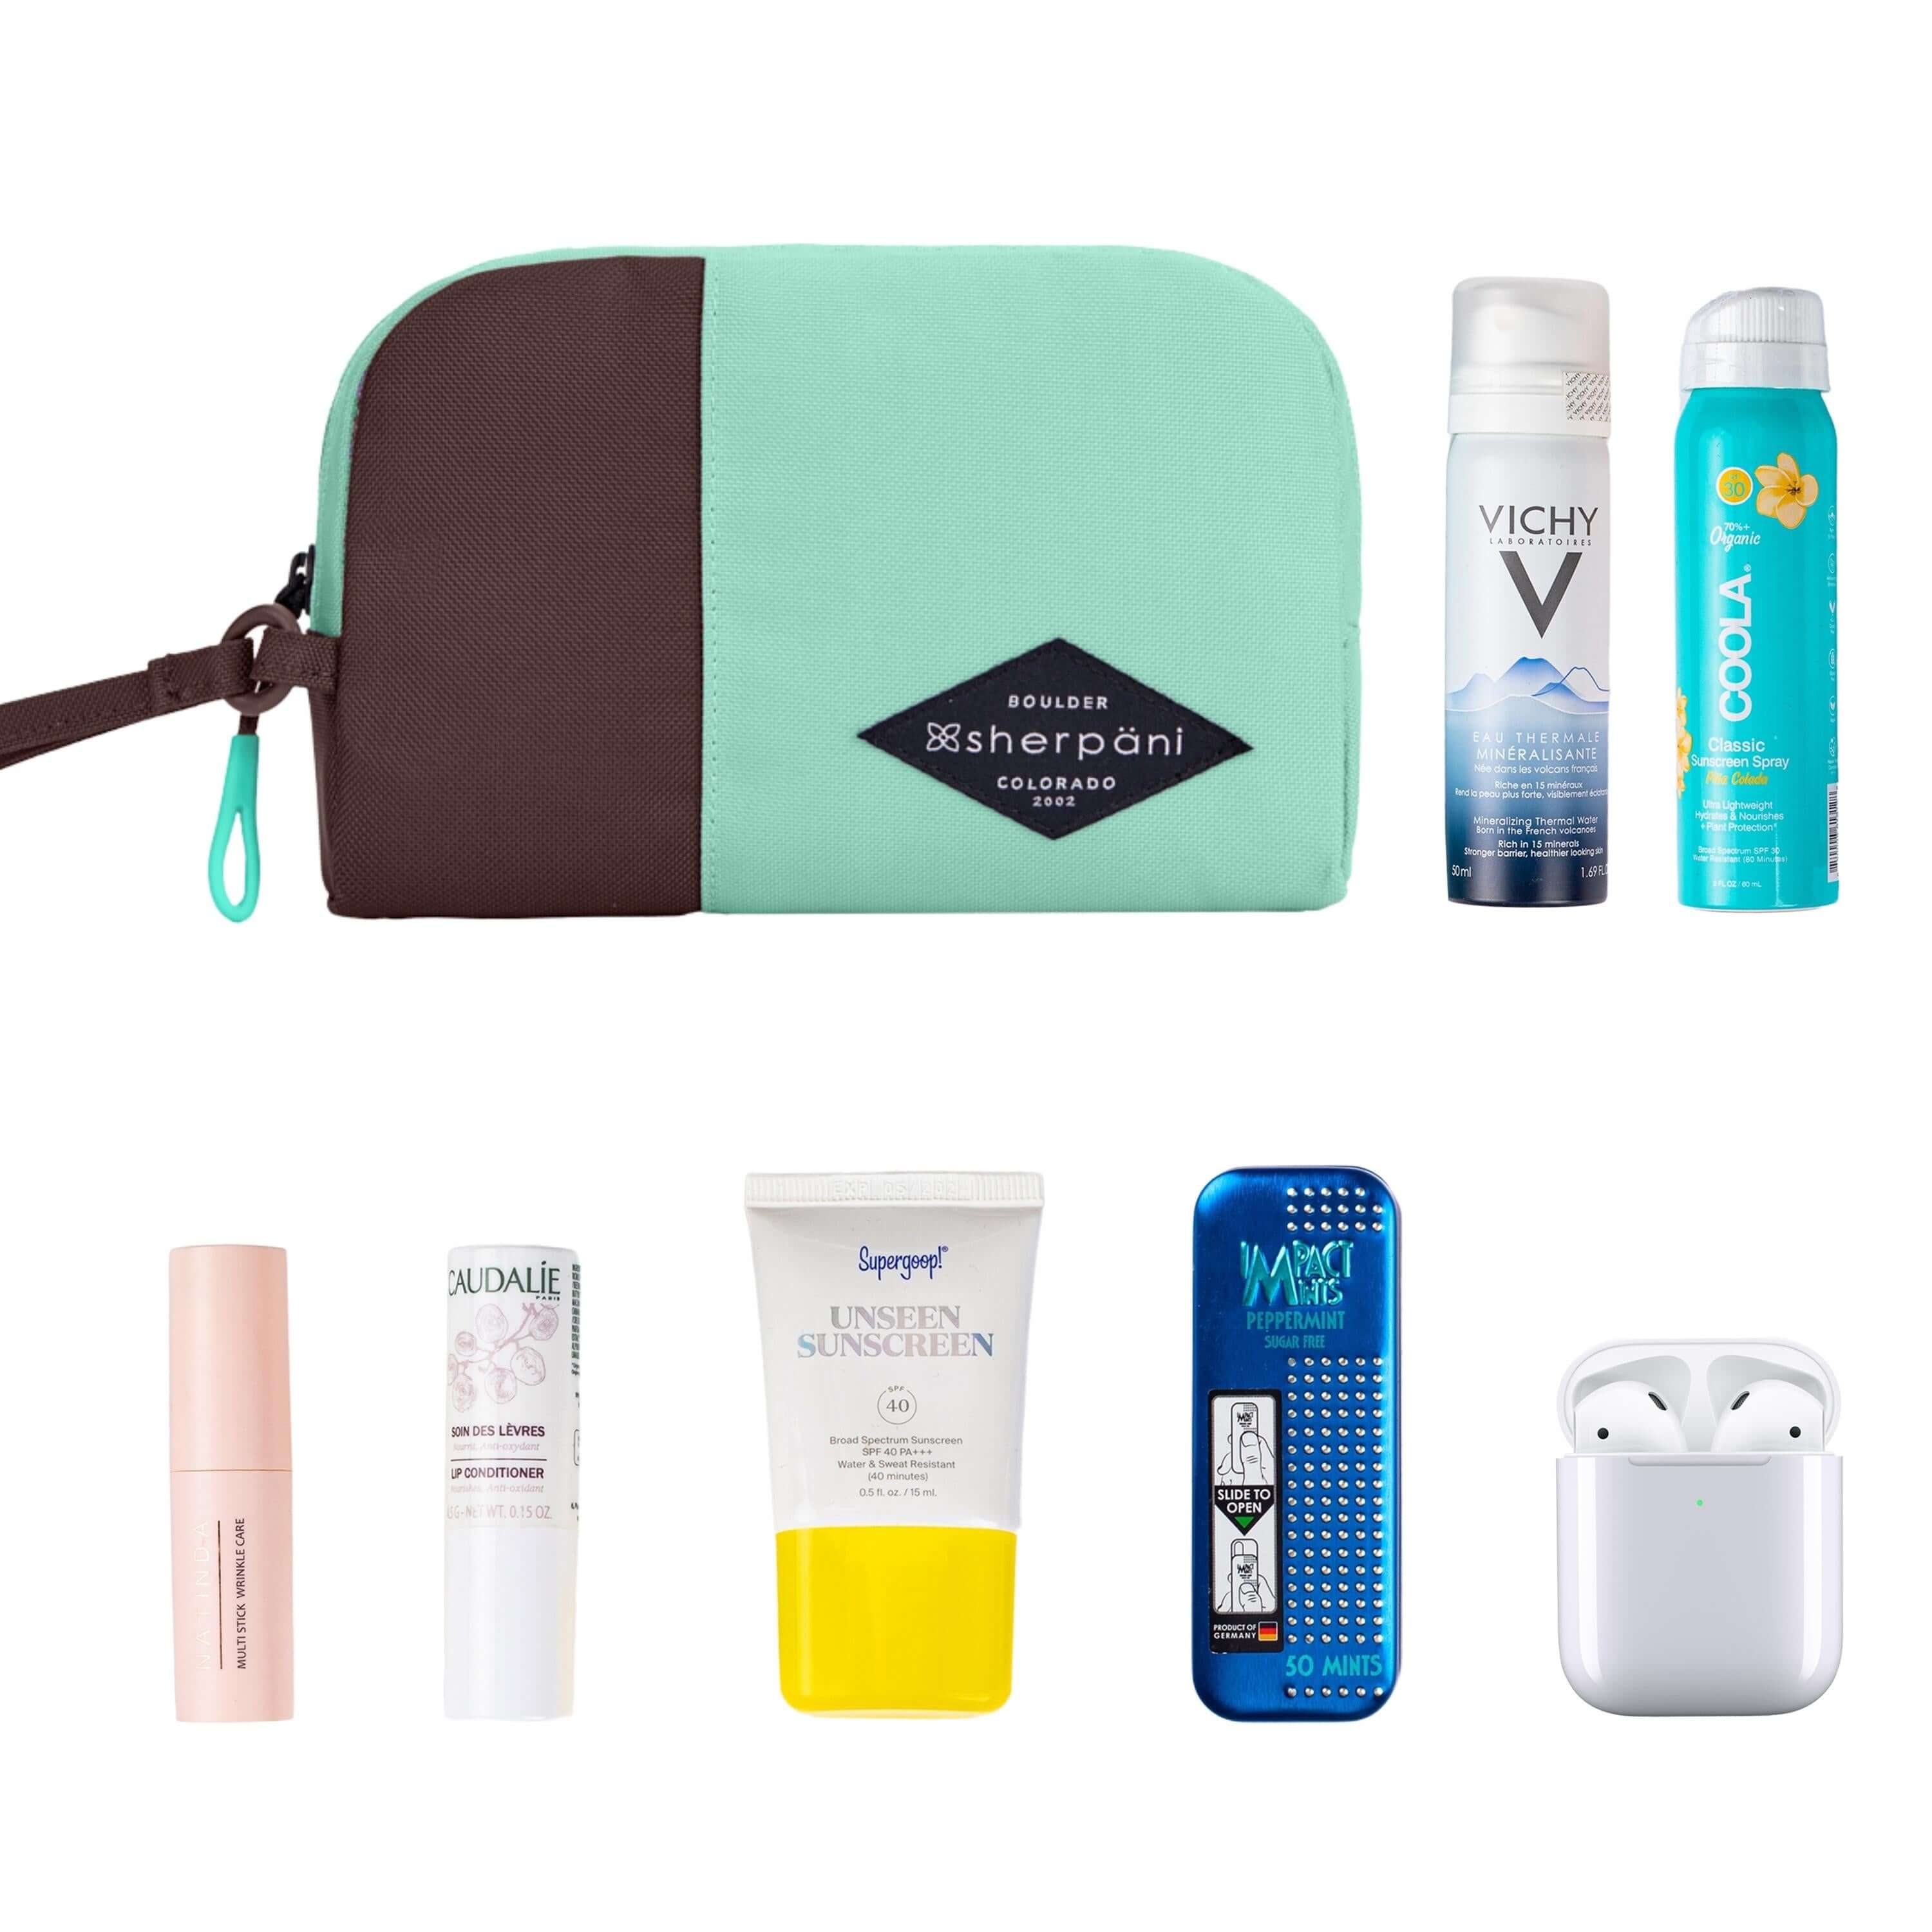 Top view of example items to fill the bag. Sherpani travel accessory, the Jolie in Seagreen in medium size, lies in the upper left corner. It is surrounded by an assortment of items: beauty products, skincare products, sunscreen, mints and AirPods.